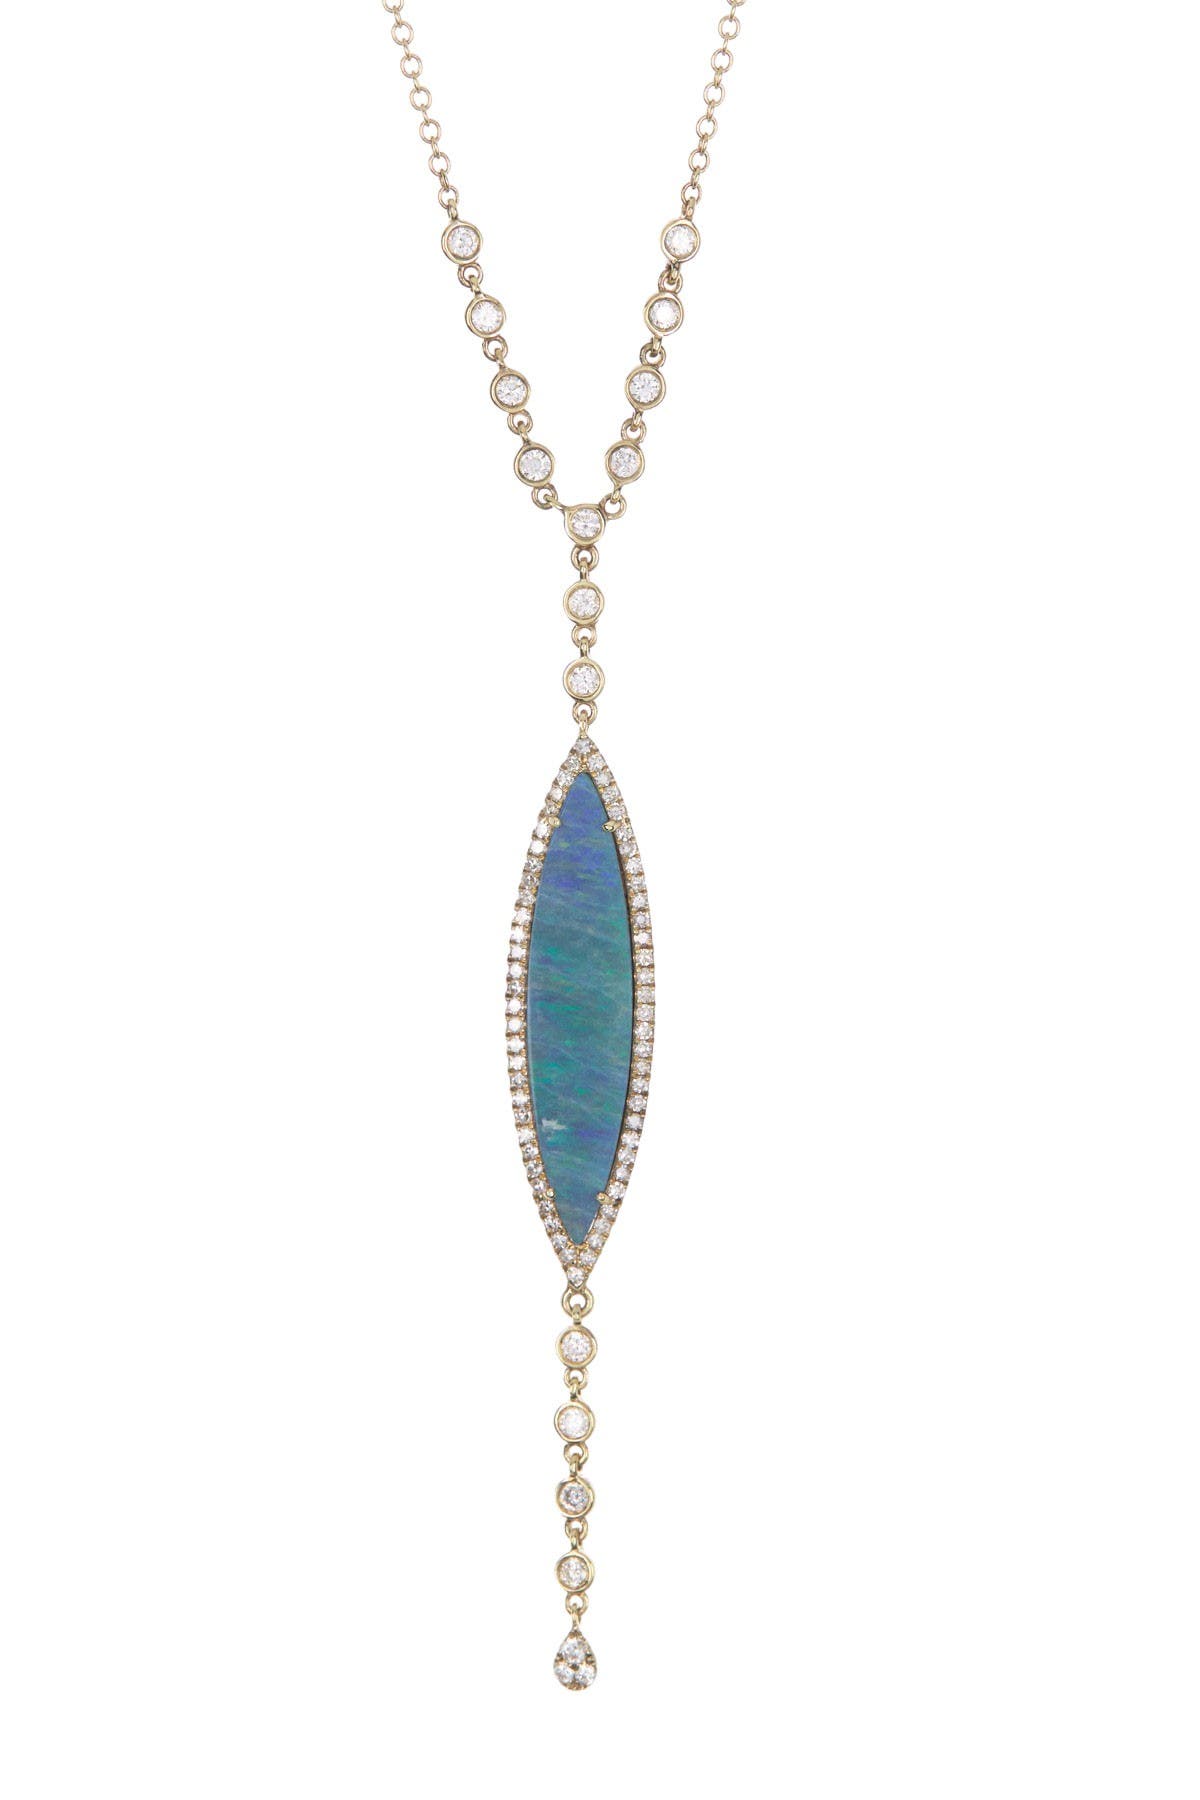 Meira T 14k Yellow Gold Marquise Opal Pendant Necklace